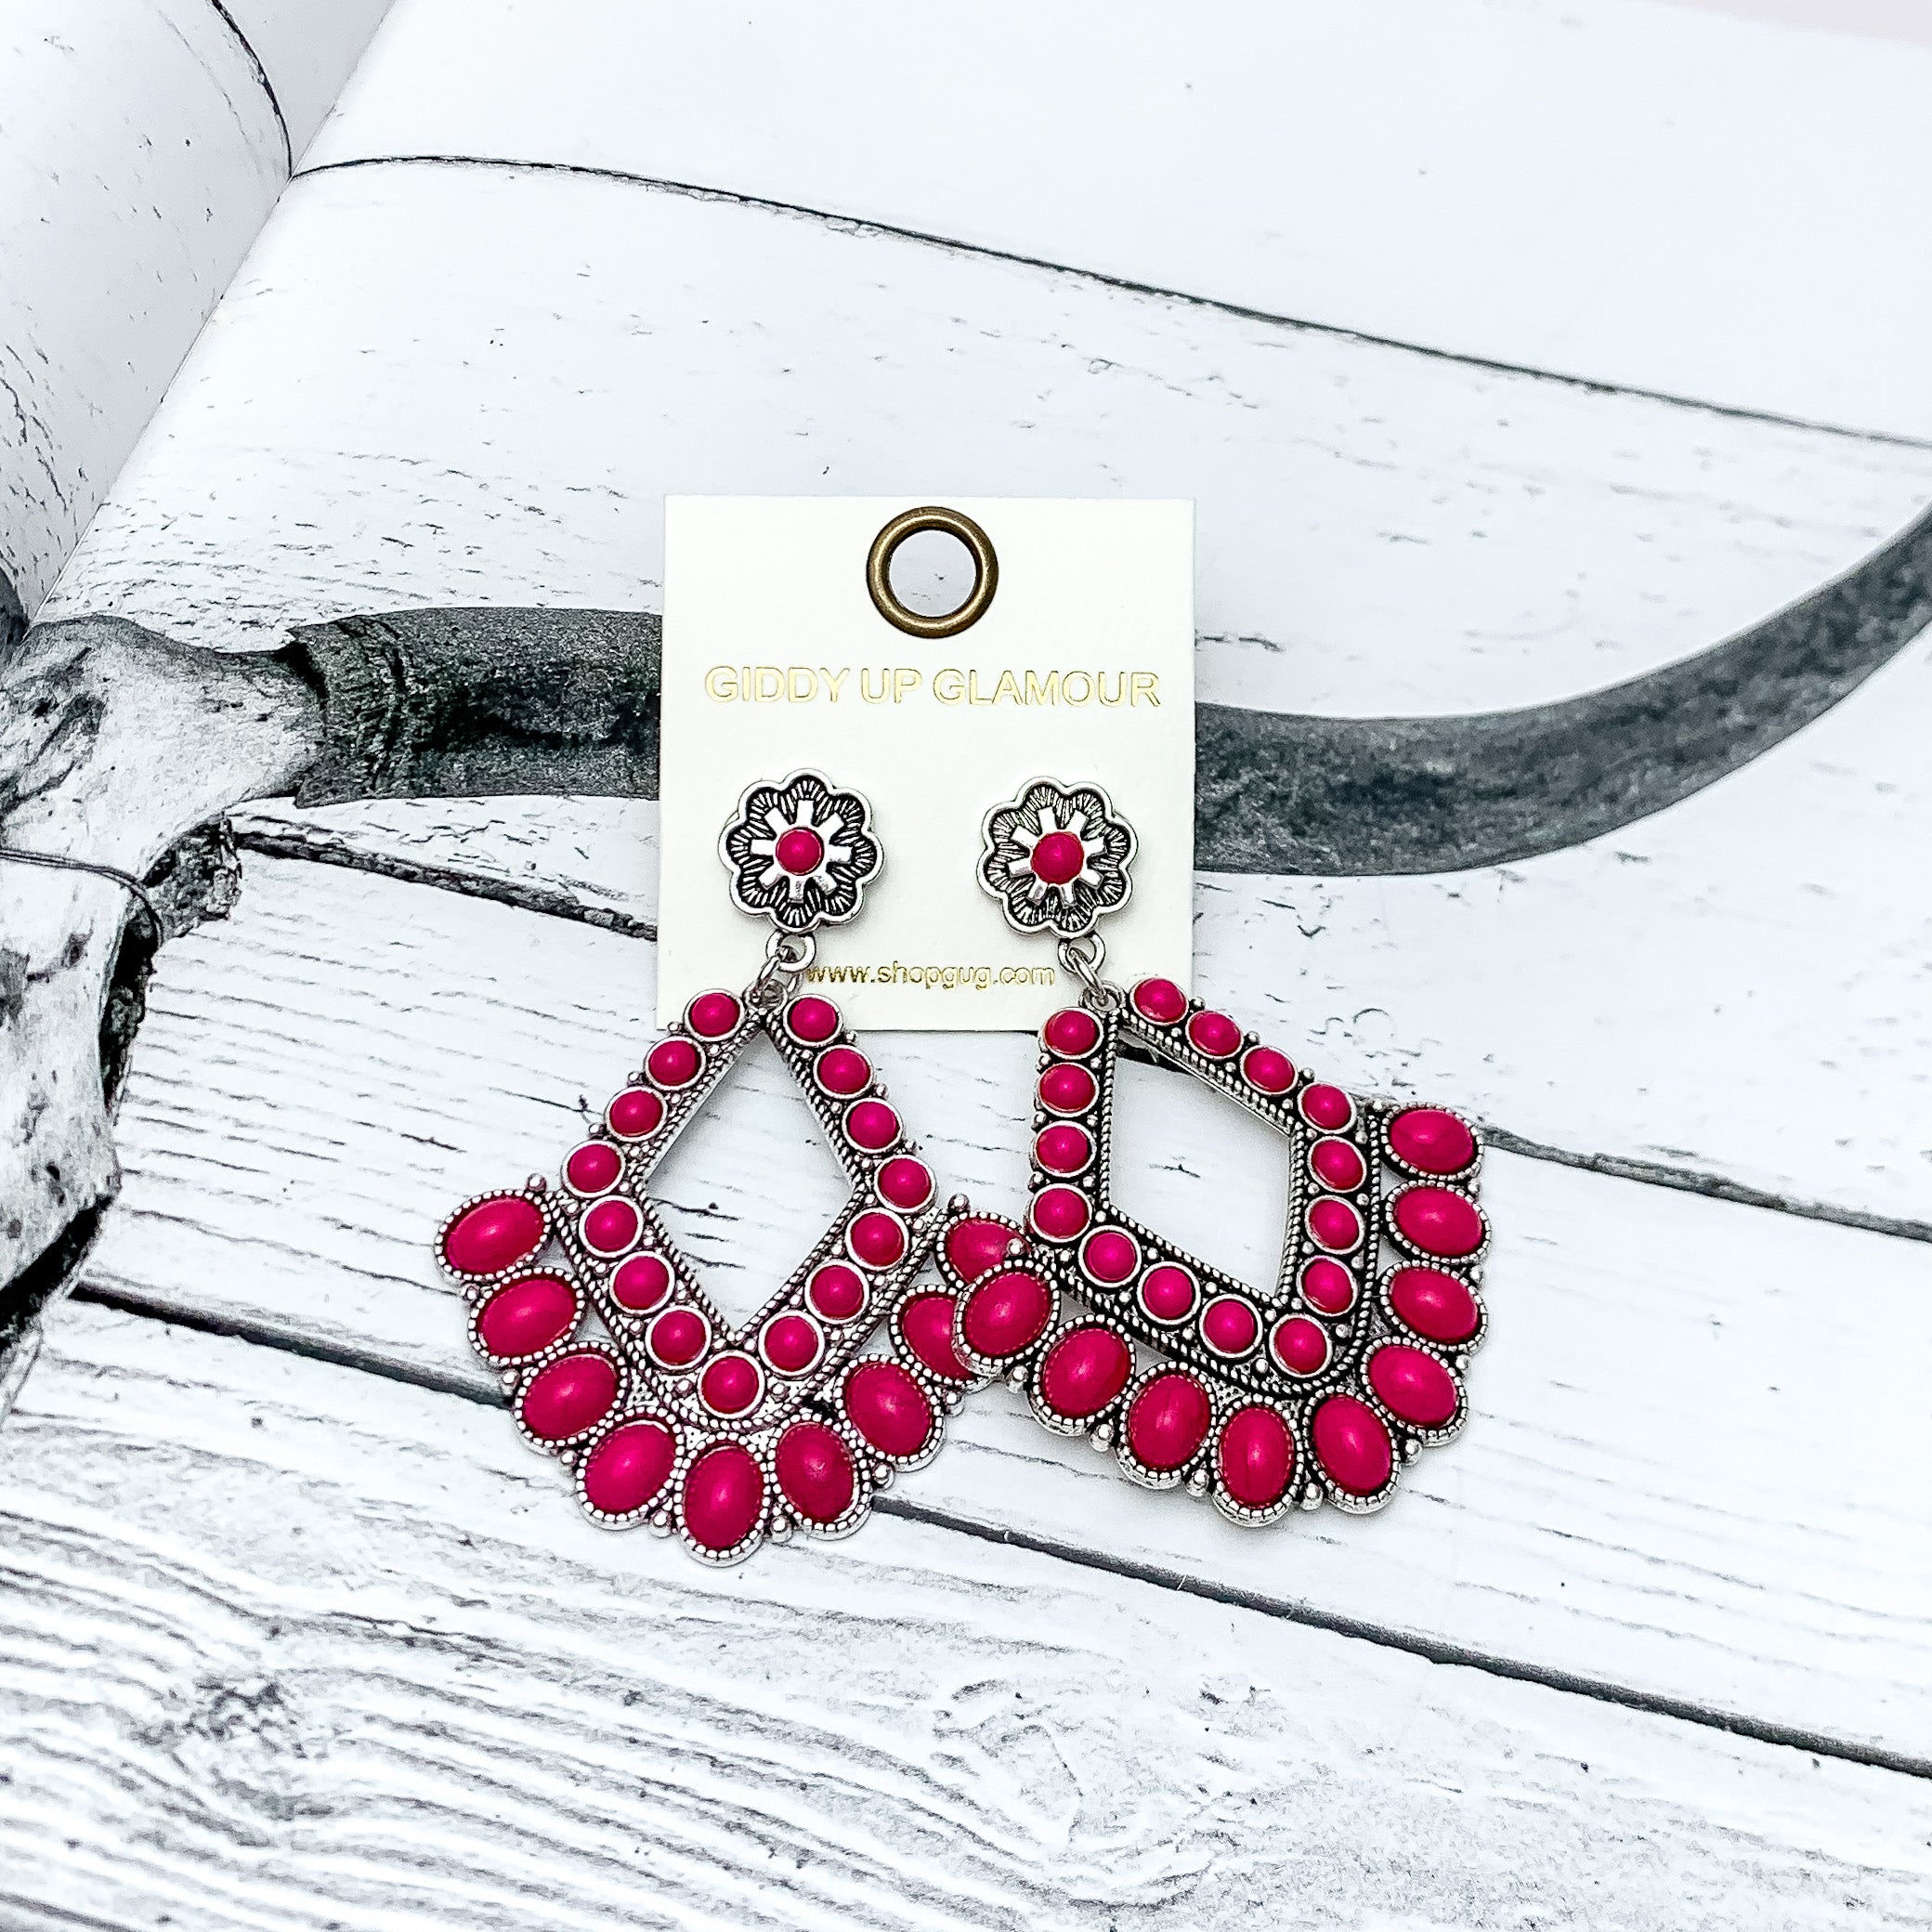 Western Chandelier Earrings in Hot Pink. Pictured on a white background with the earrings on a western background.